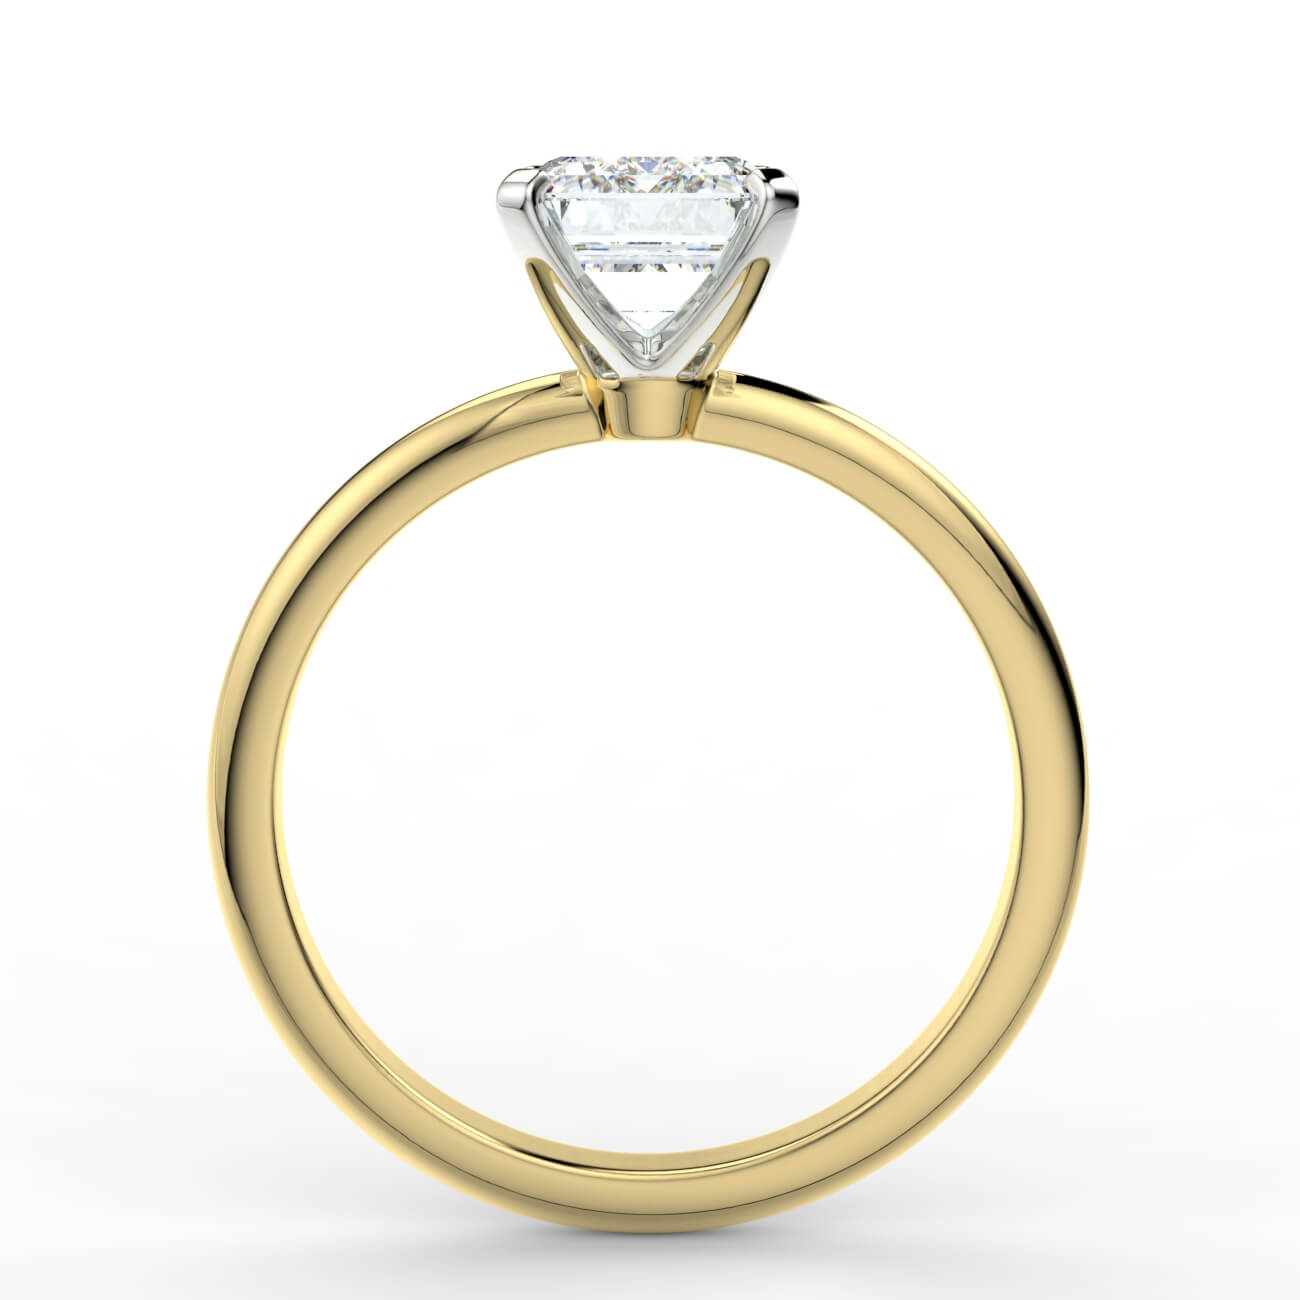 Knife-edge solitaire emerald cut diamond engagement ring in yellow and white gold – Australian Diamond Network